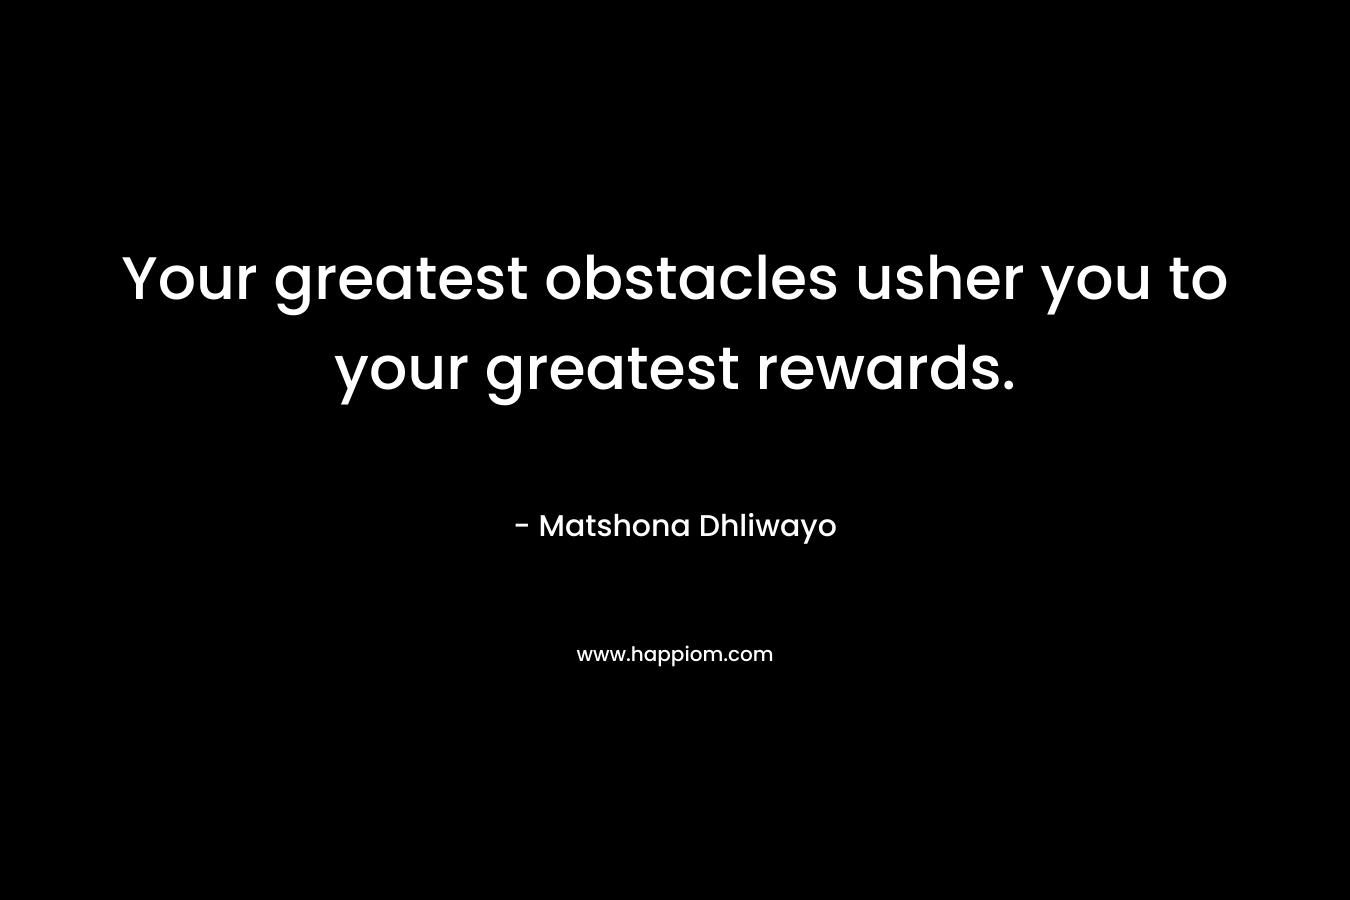 Your greatest obstacles usher you to your greatest rewards.